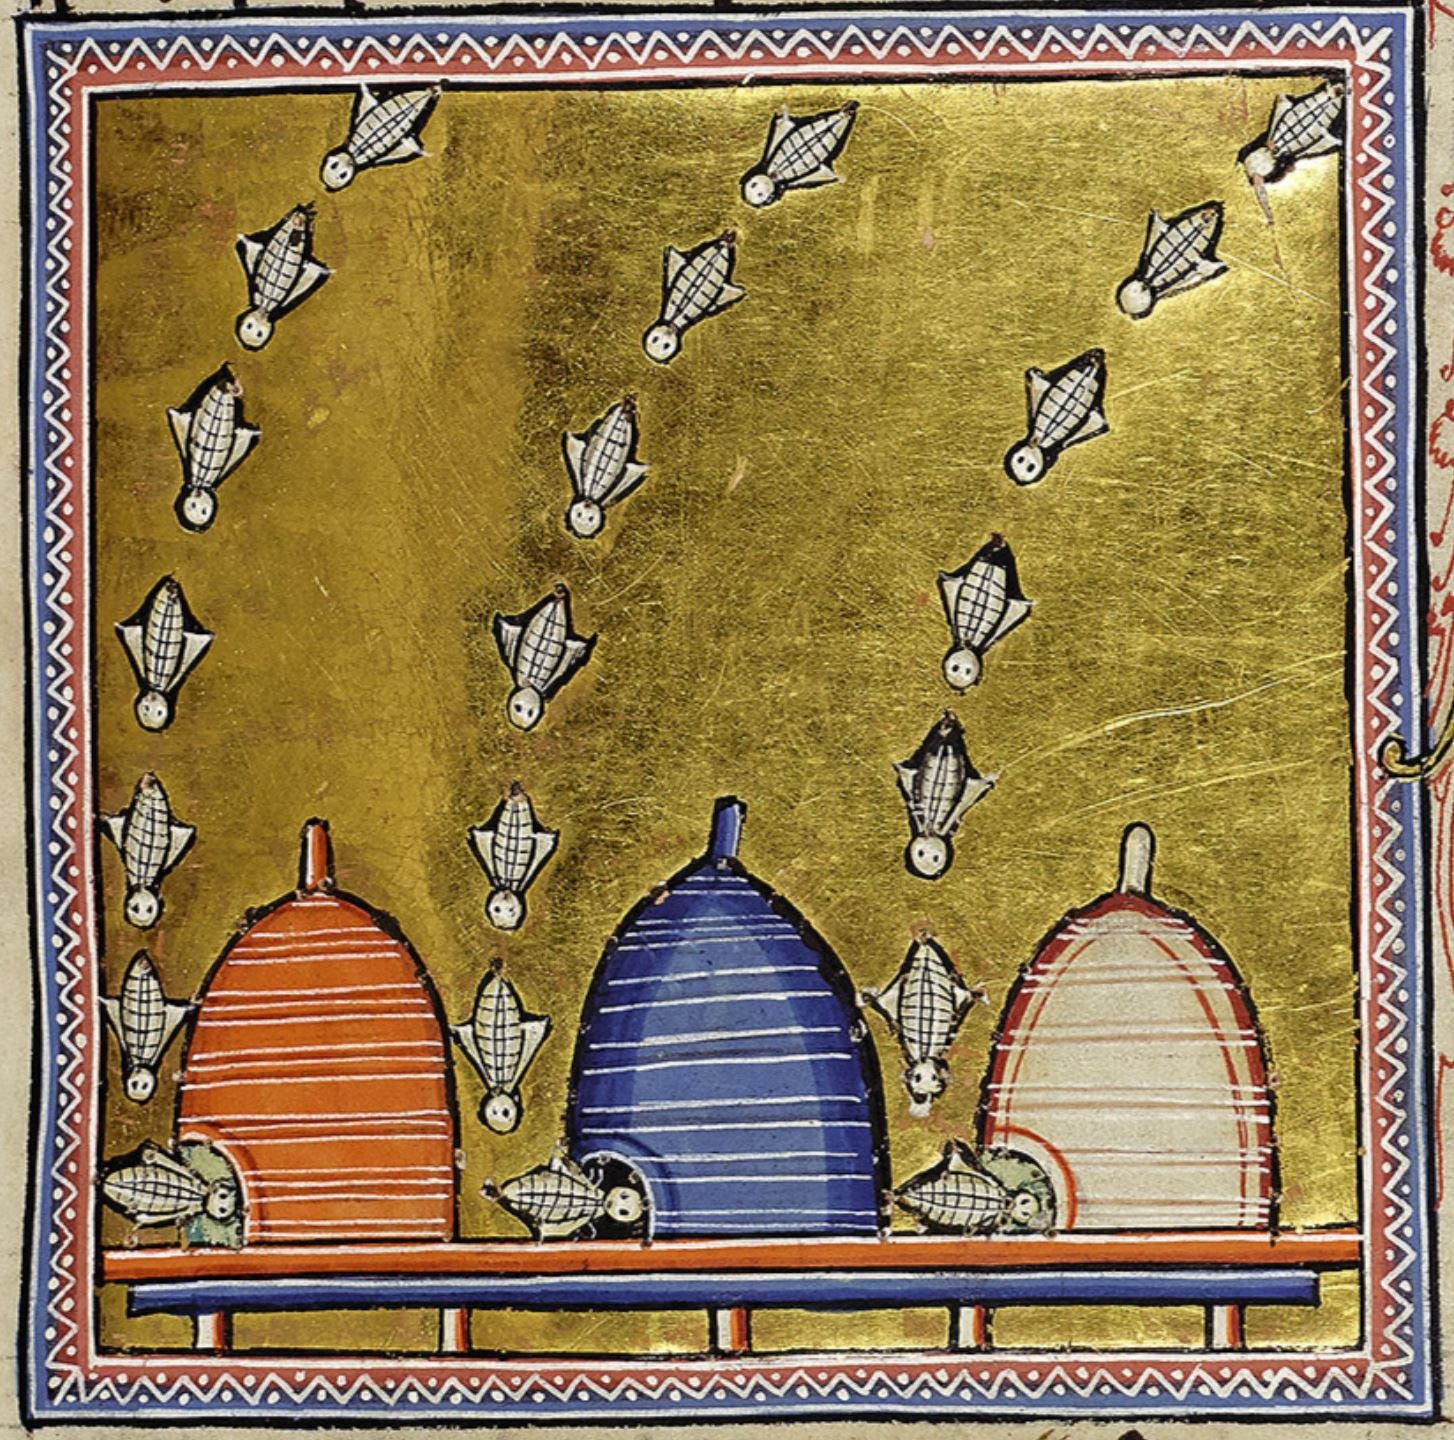 Three lines of bees returning to 3 sklep type hives against a gorgeous gold illuminated background of a medieval manuscript